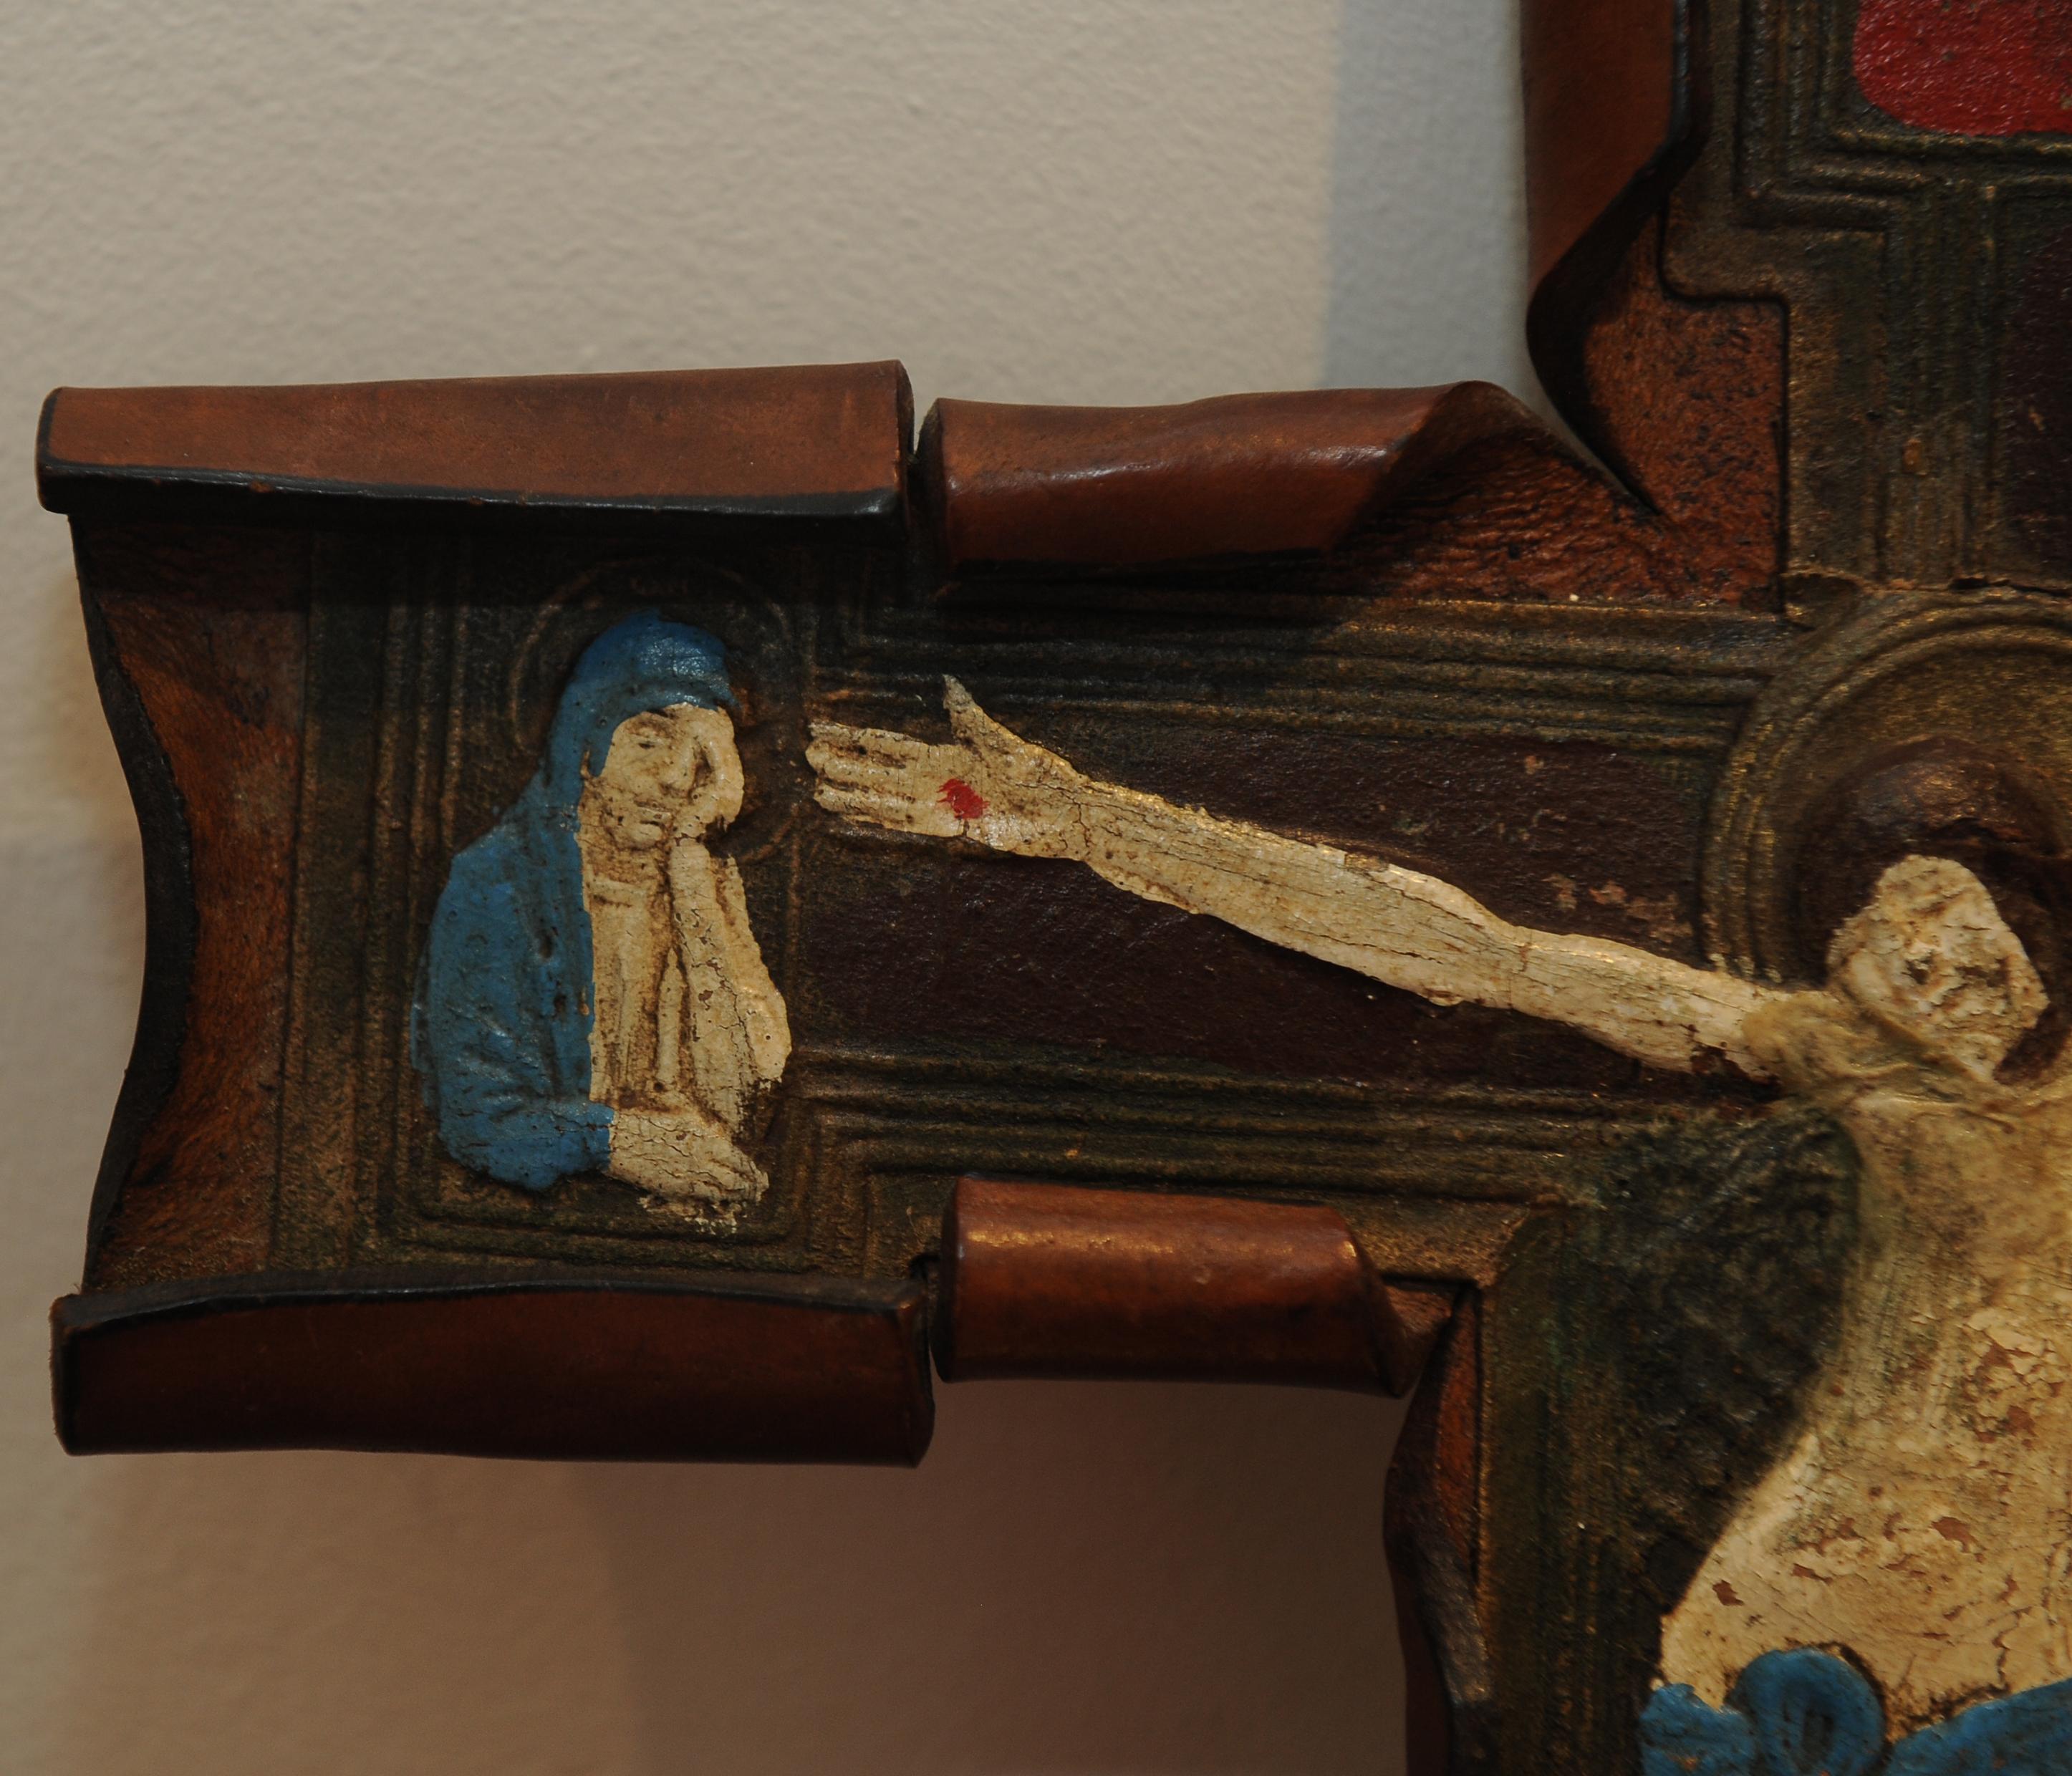 19th Century Hand Made Leather Folk Art Crucifix Featuring A Hand Painted Depiction of Jesus Upon The Cross With A Mourning Joseph & Mary.  

A Hand Made Hand Painted Folk Art Decorative Item, to Grace Your Wall. 